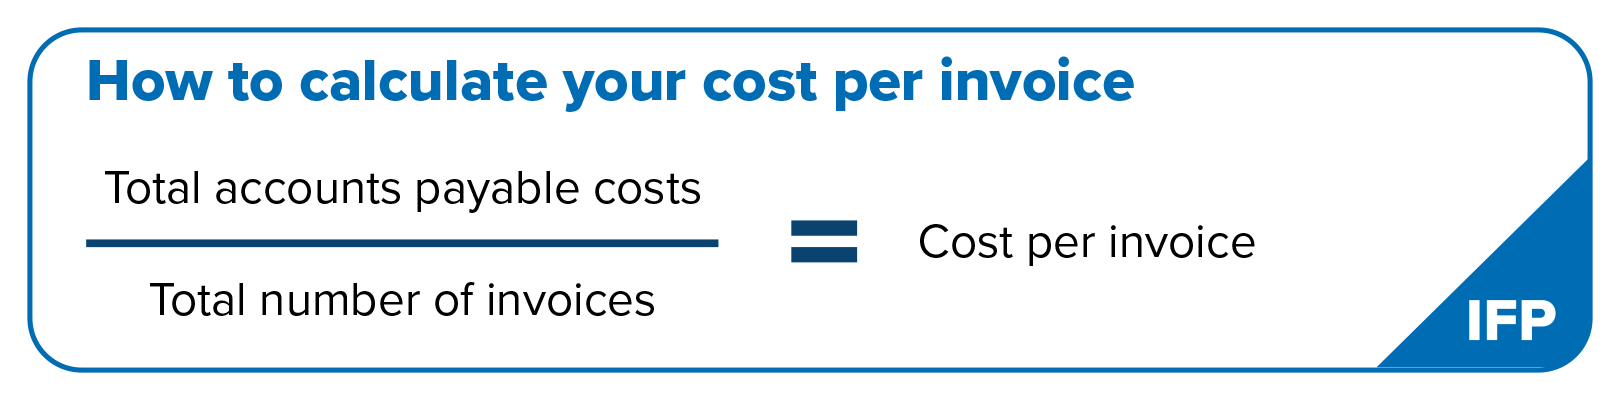 IFP visual showing how to calculate the total cost per invoice